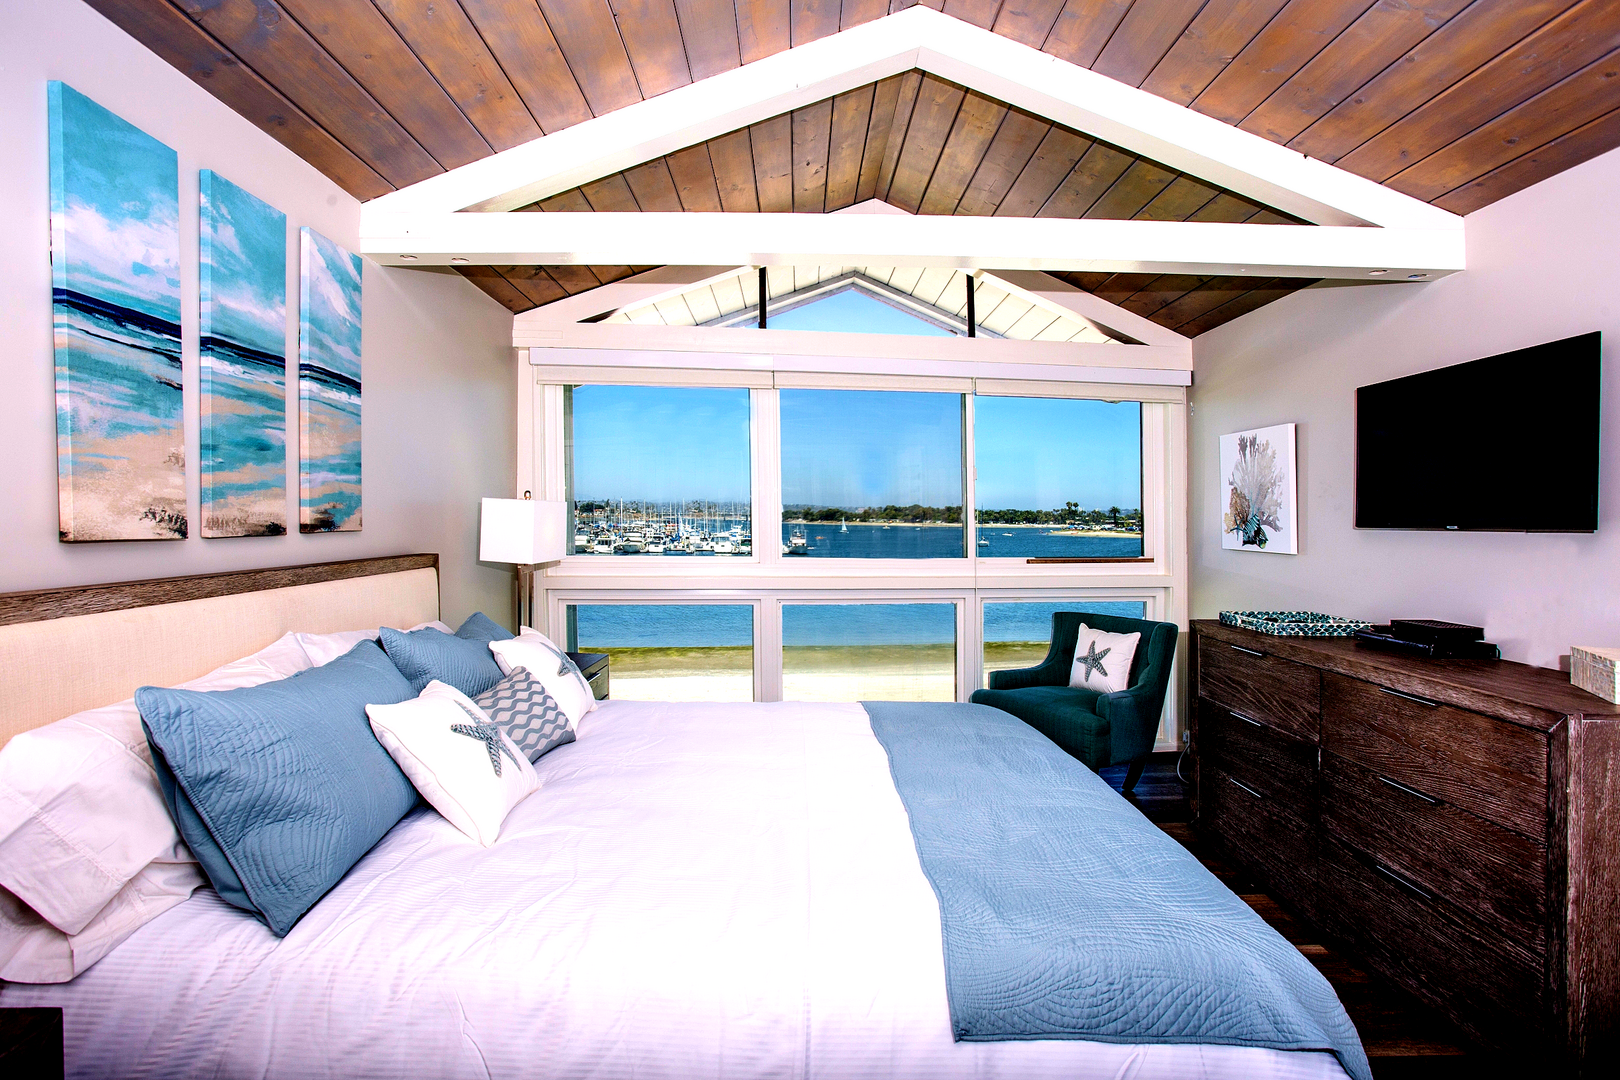 Floors were recently remodeled. Master bedroom with floor to ceiling windows to maximize your view of Mission Bay.